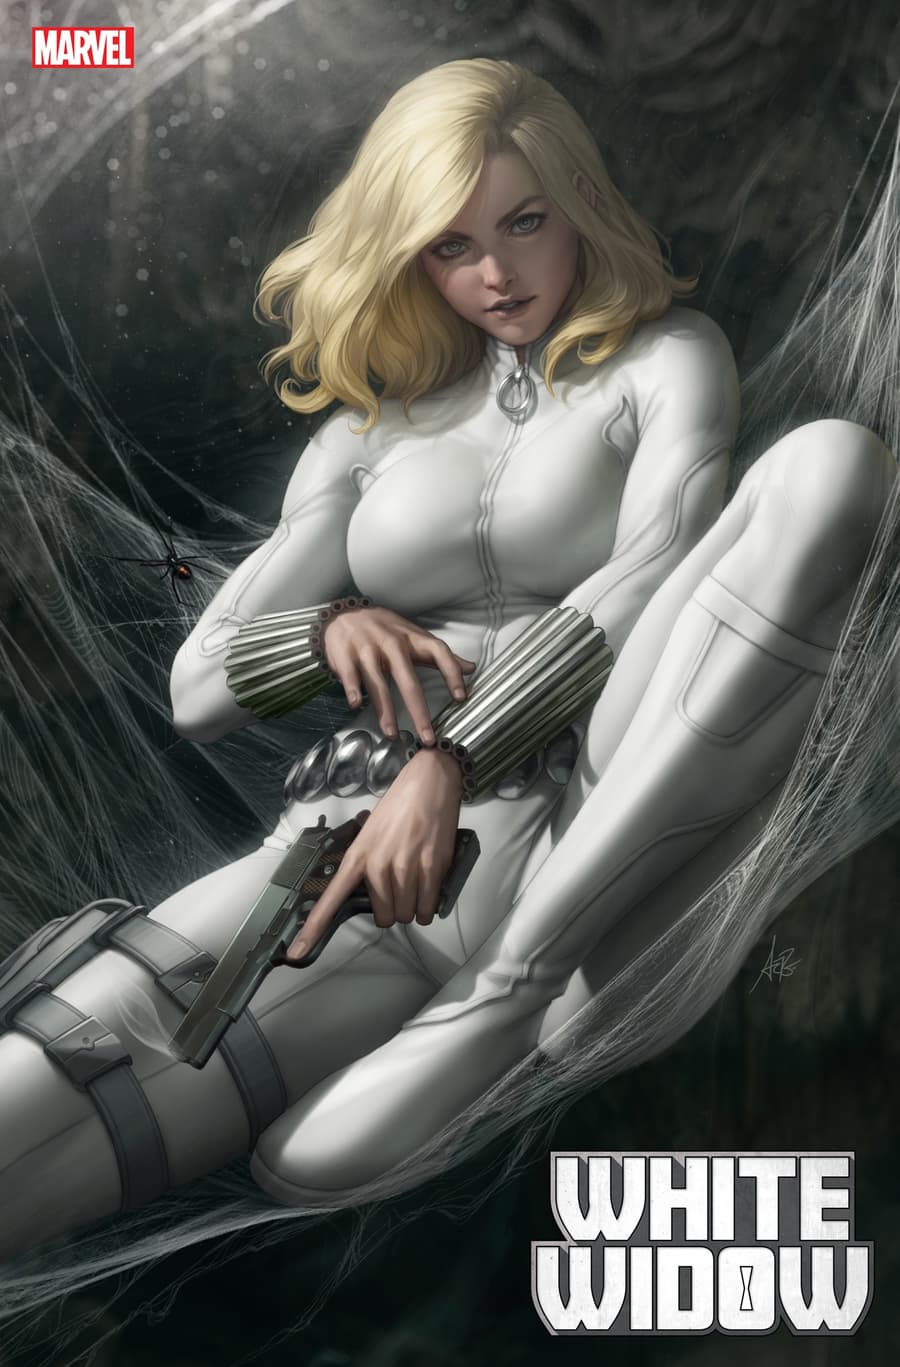 WHITE WIDOW #1 variant cover by Stanley "Artgerm" Lau